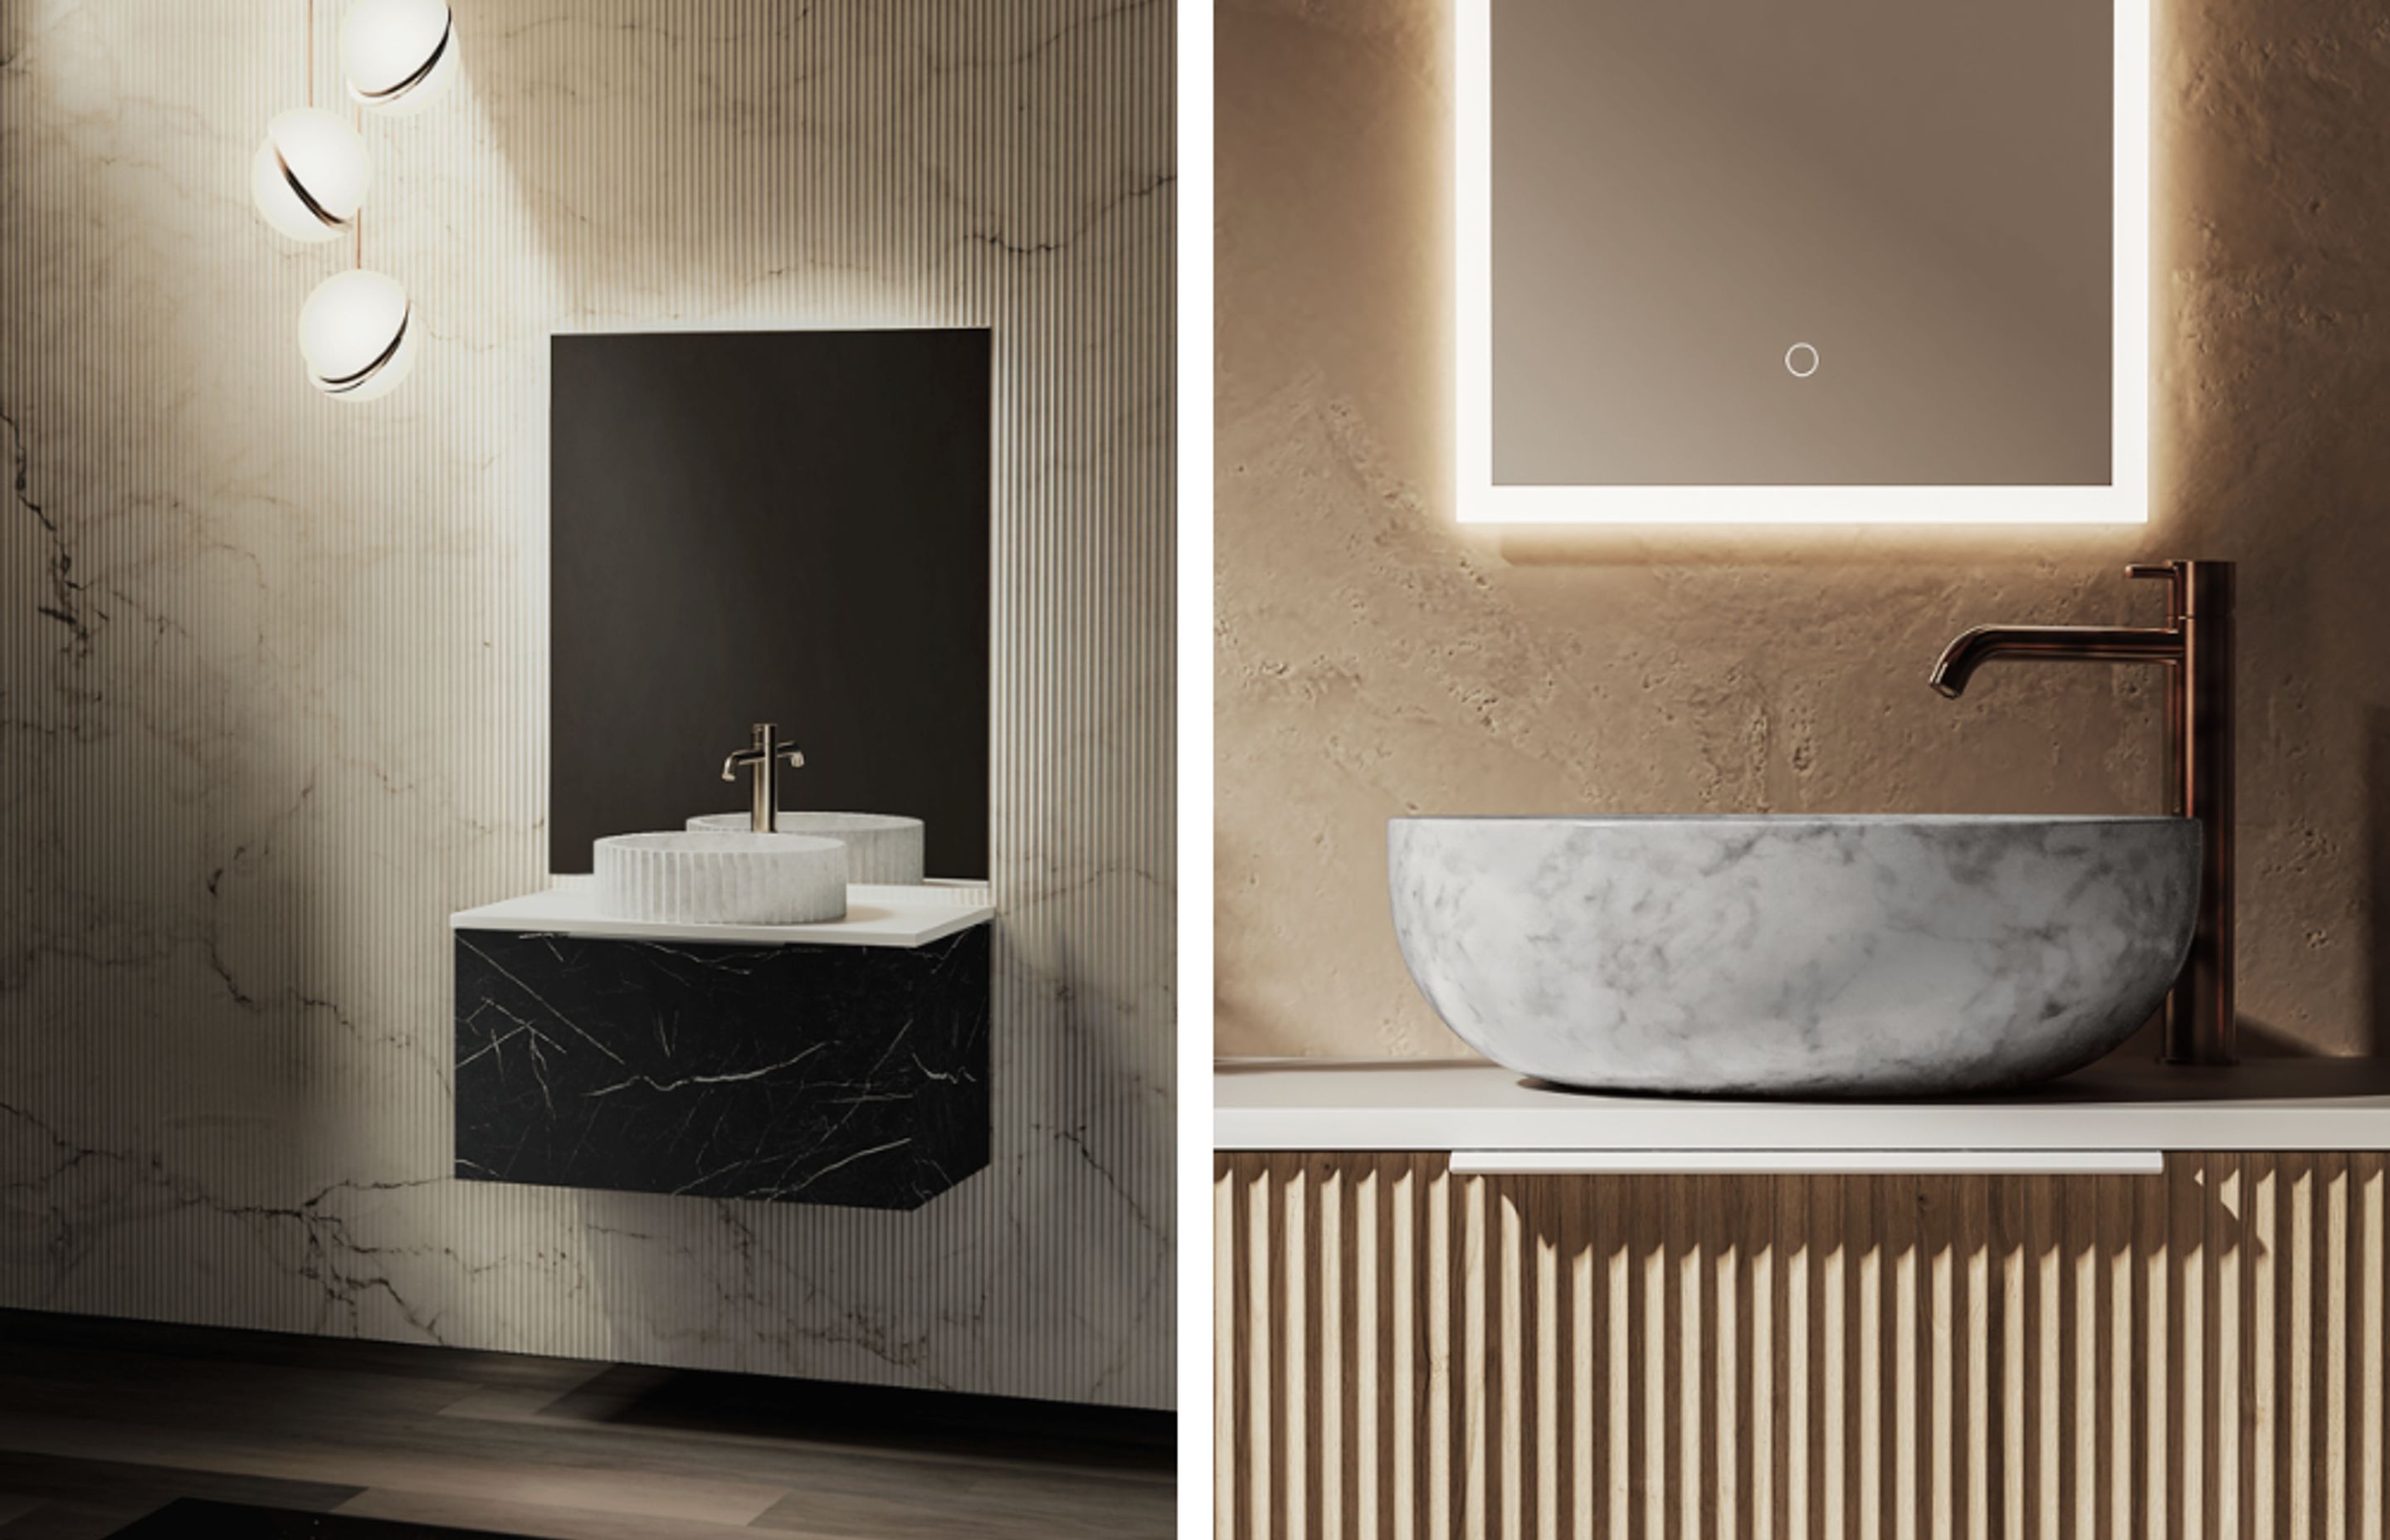 The new Toscana Opaco vanity in catalina (left) and Marmo round vessel basin in Mugla White (right)